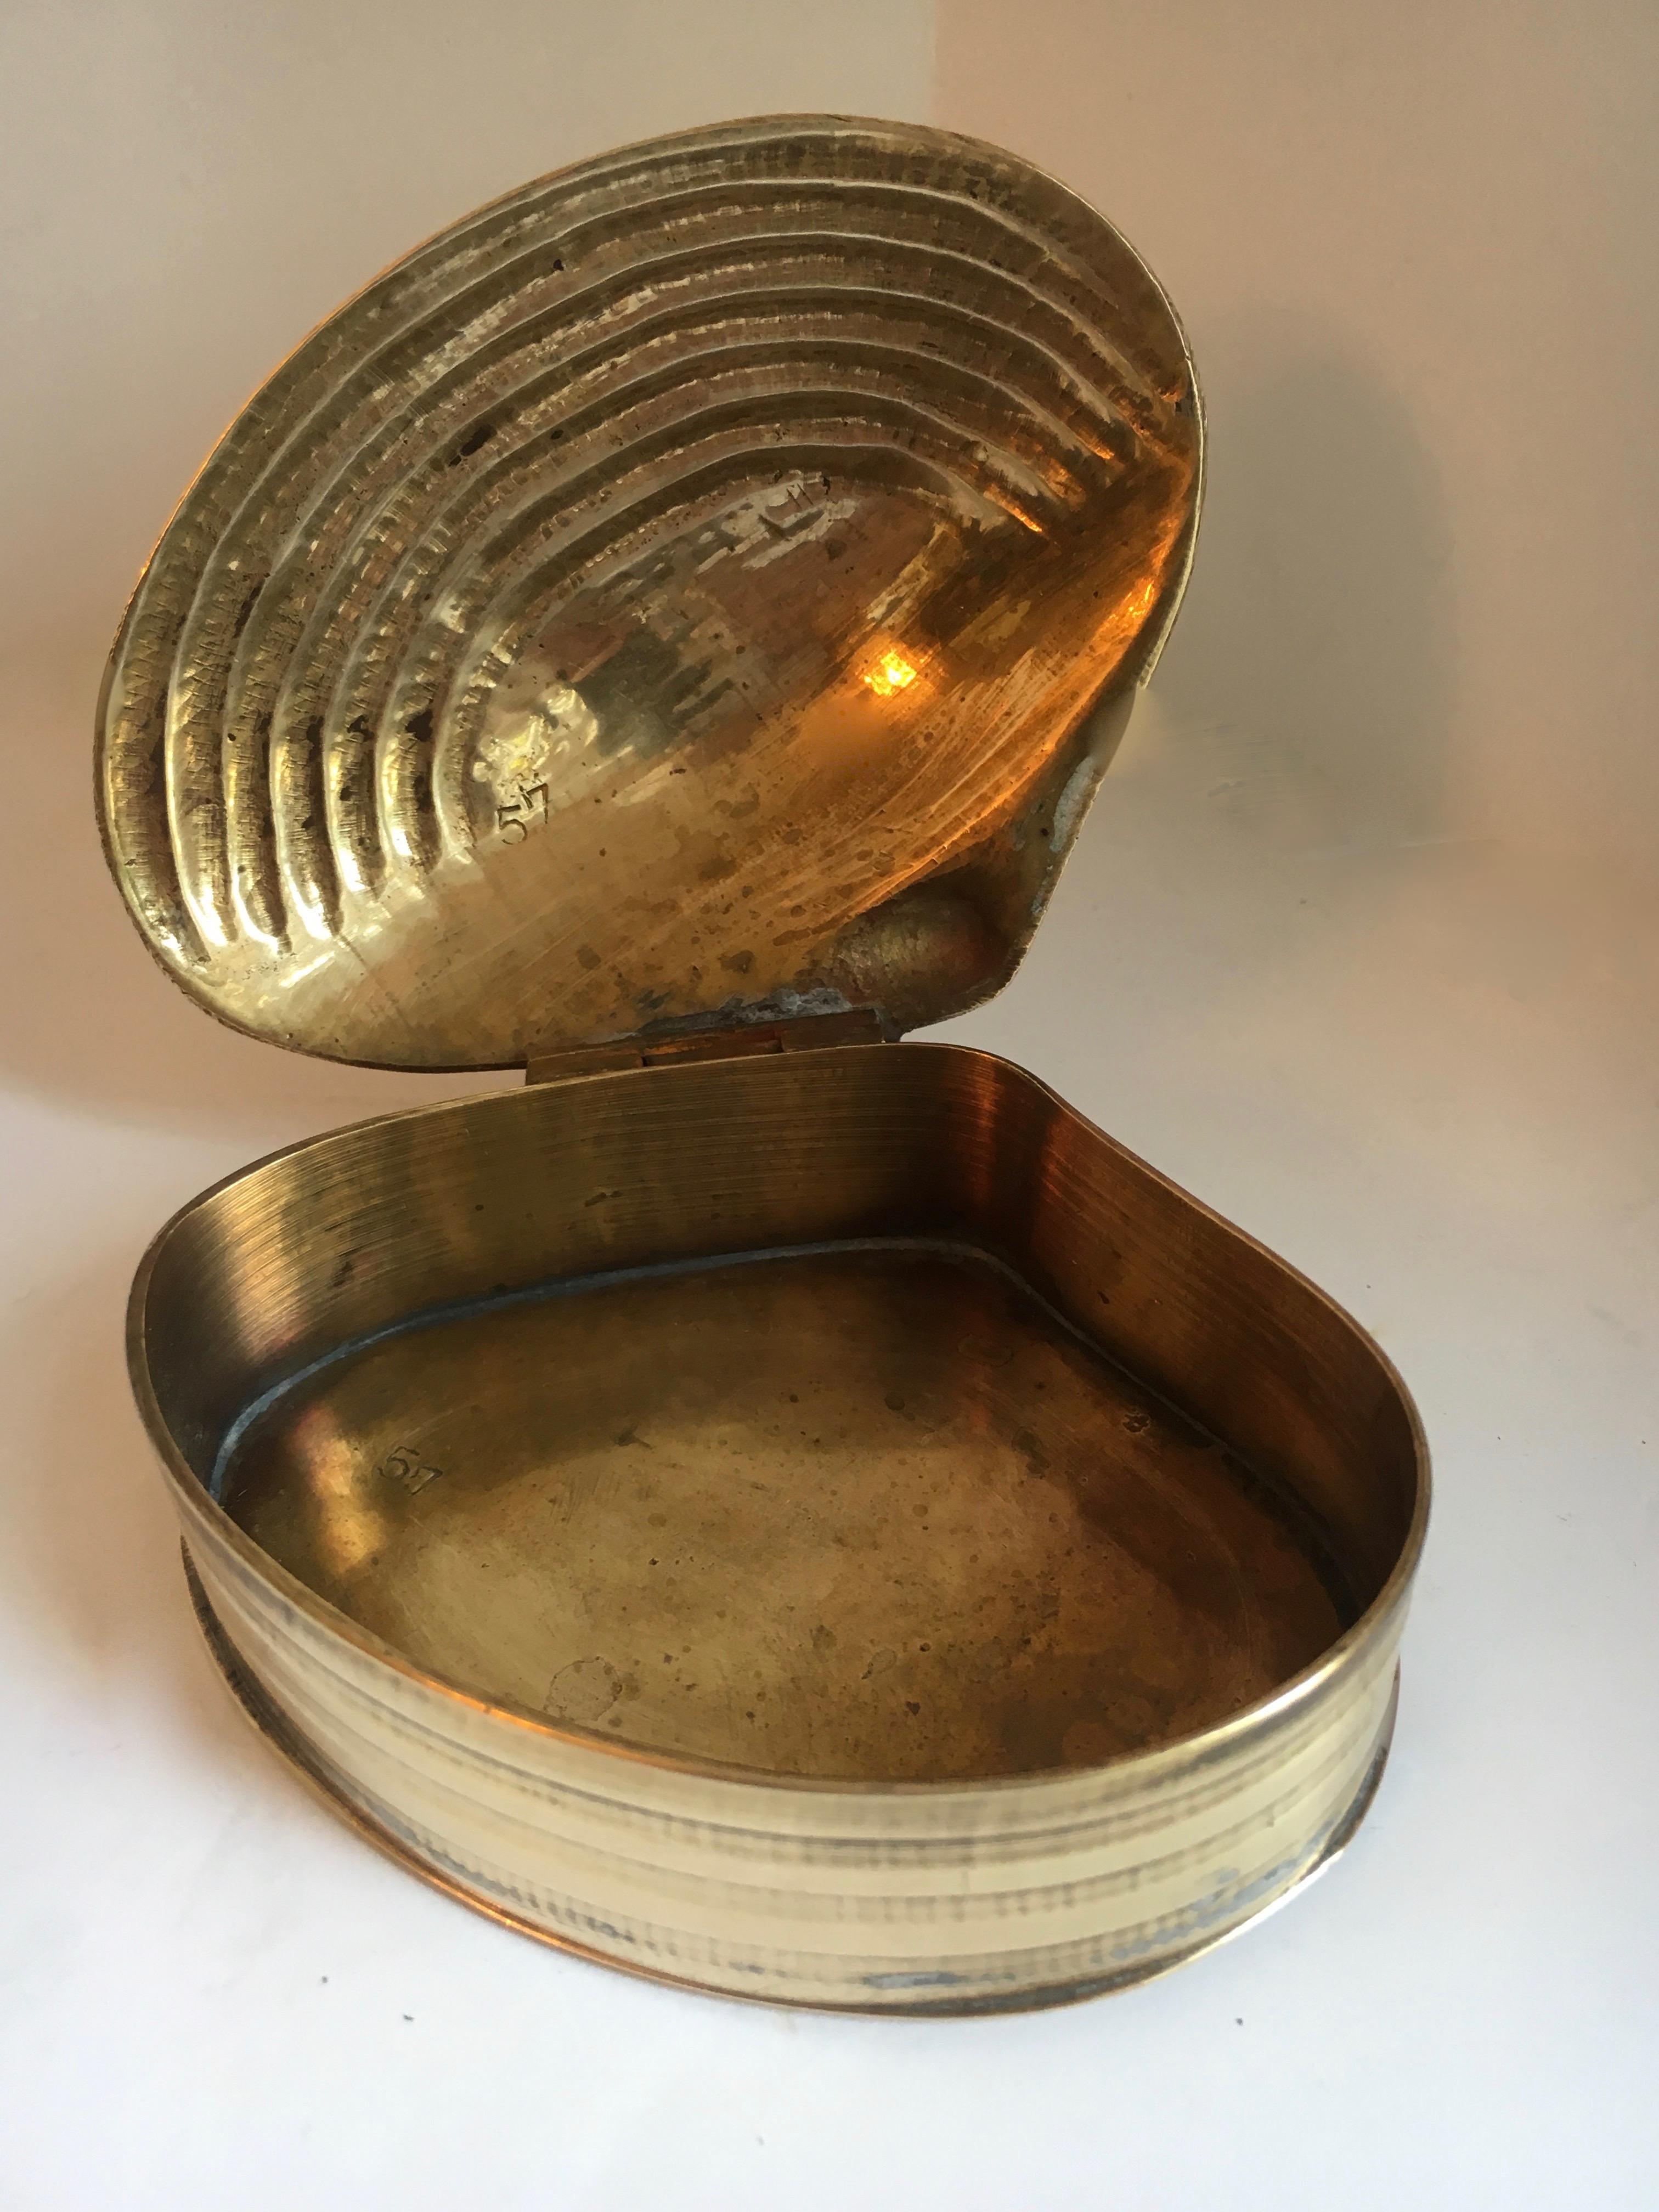 Brass clam shell box with hinged lid - to store everything from paper clips to diamond rings.